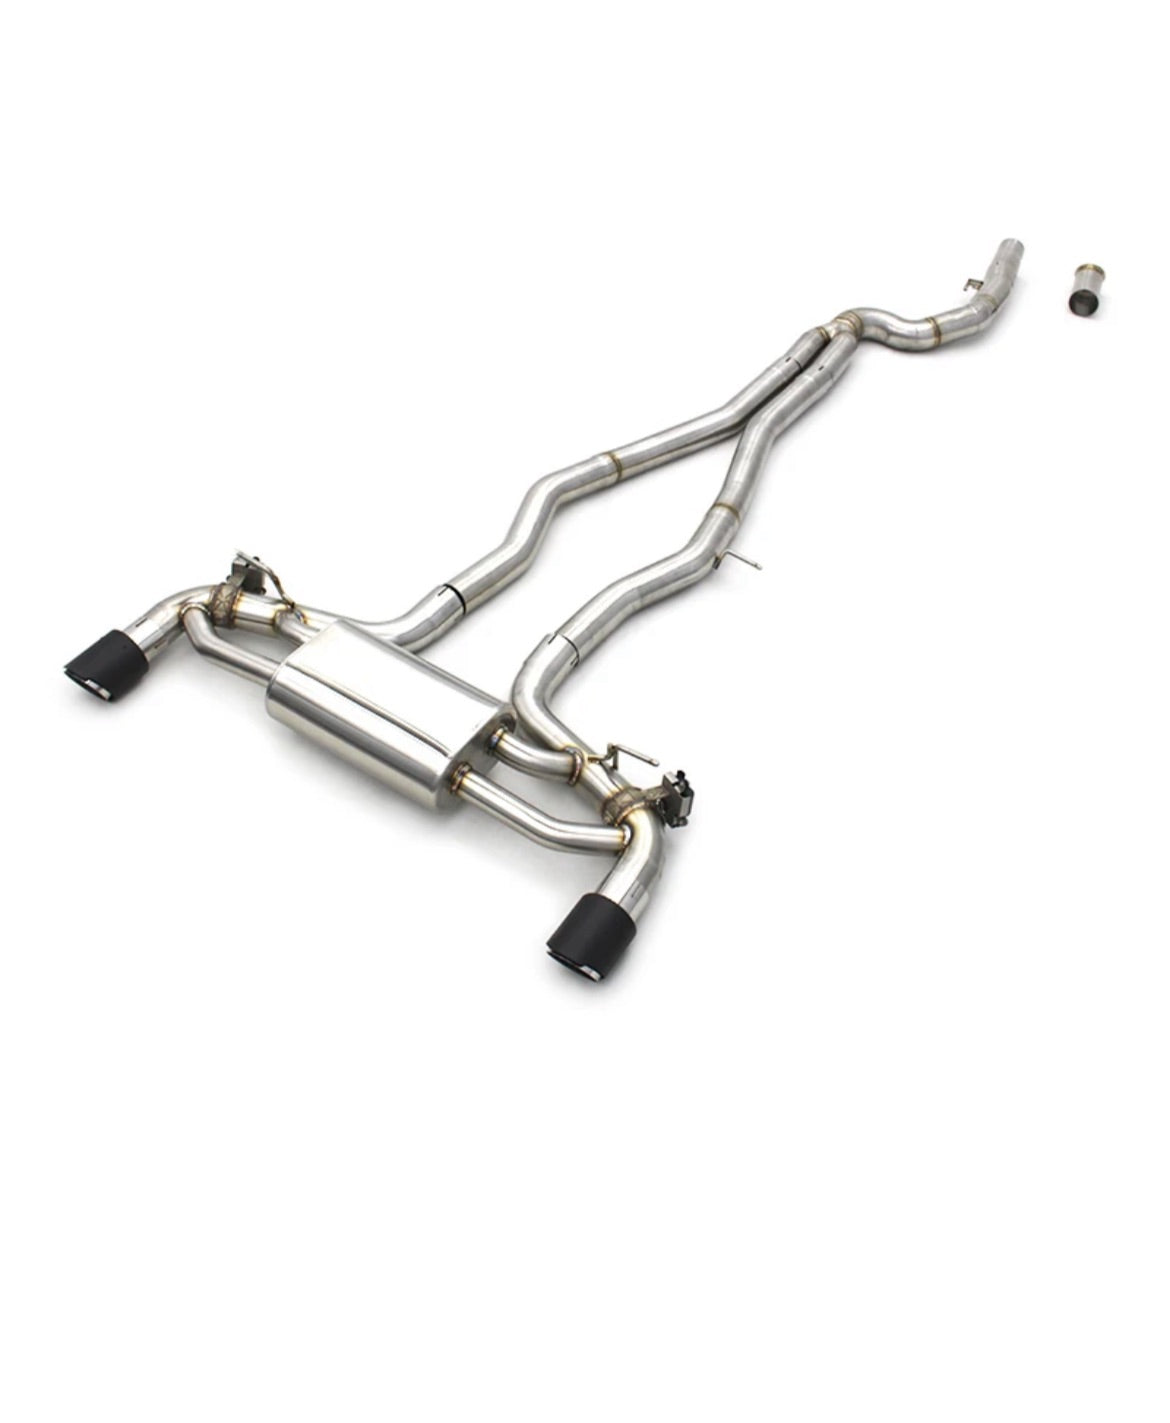 Supra A90/A91 Cen-Cal Valved Catback Exhaust (Stainless Steel)